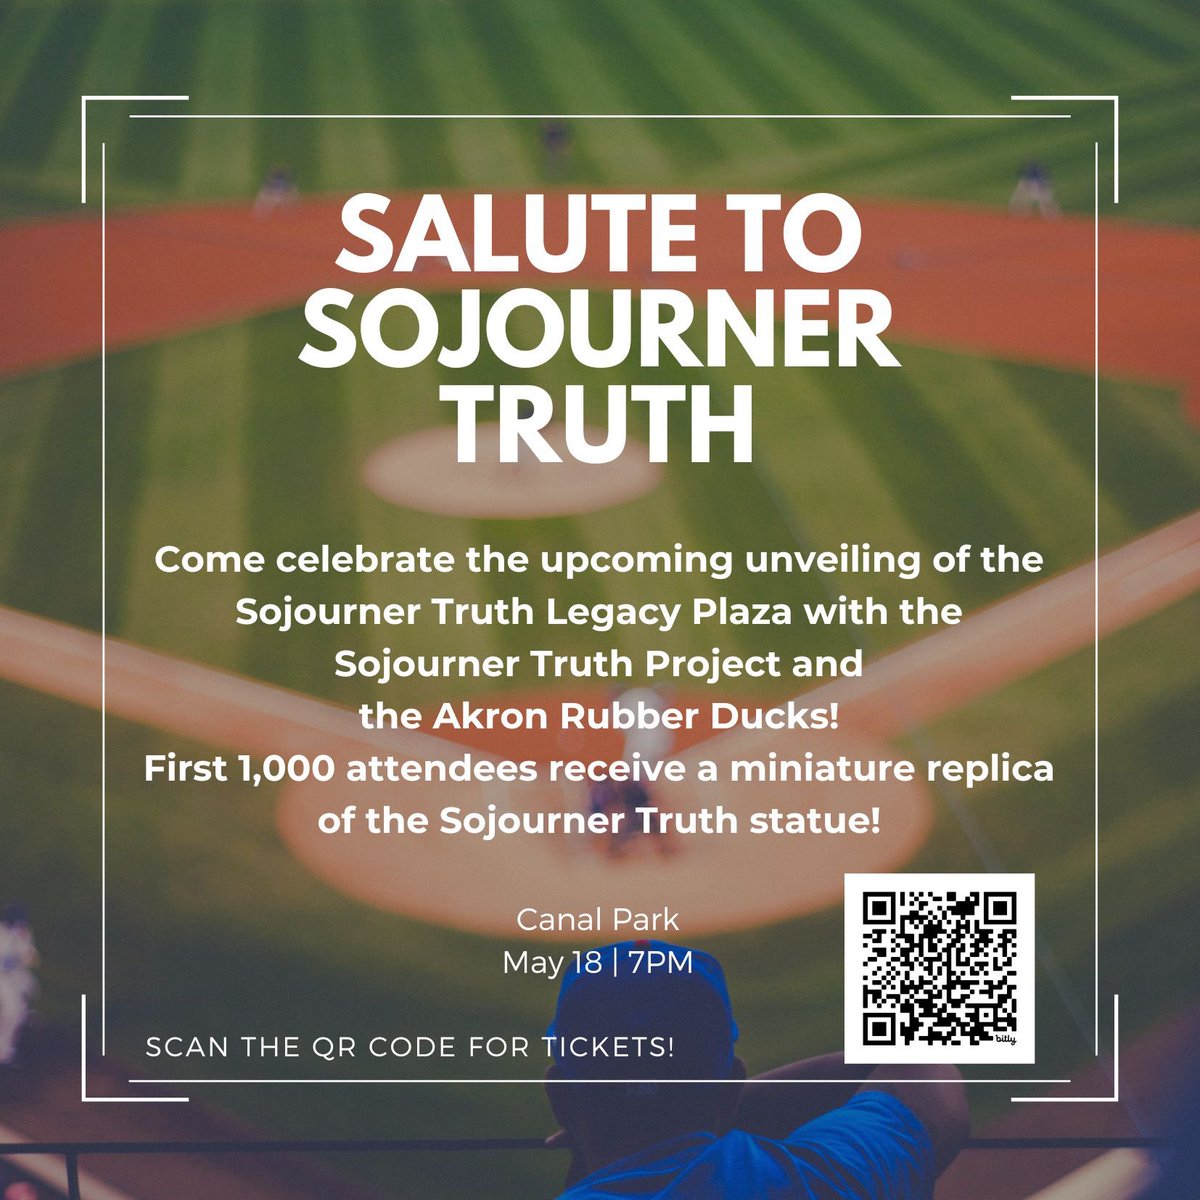 🚨⚾️Get your tickets now! ⚾️🚨 You do not want to miss the kick off to our Sojourner Truth Legacy Plaza celebrations!!! Get your tickets for Akron Rubber Ducks “Salute to Sojourner Truth Night” at the ballpark on Saturday, May 18th!